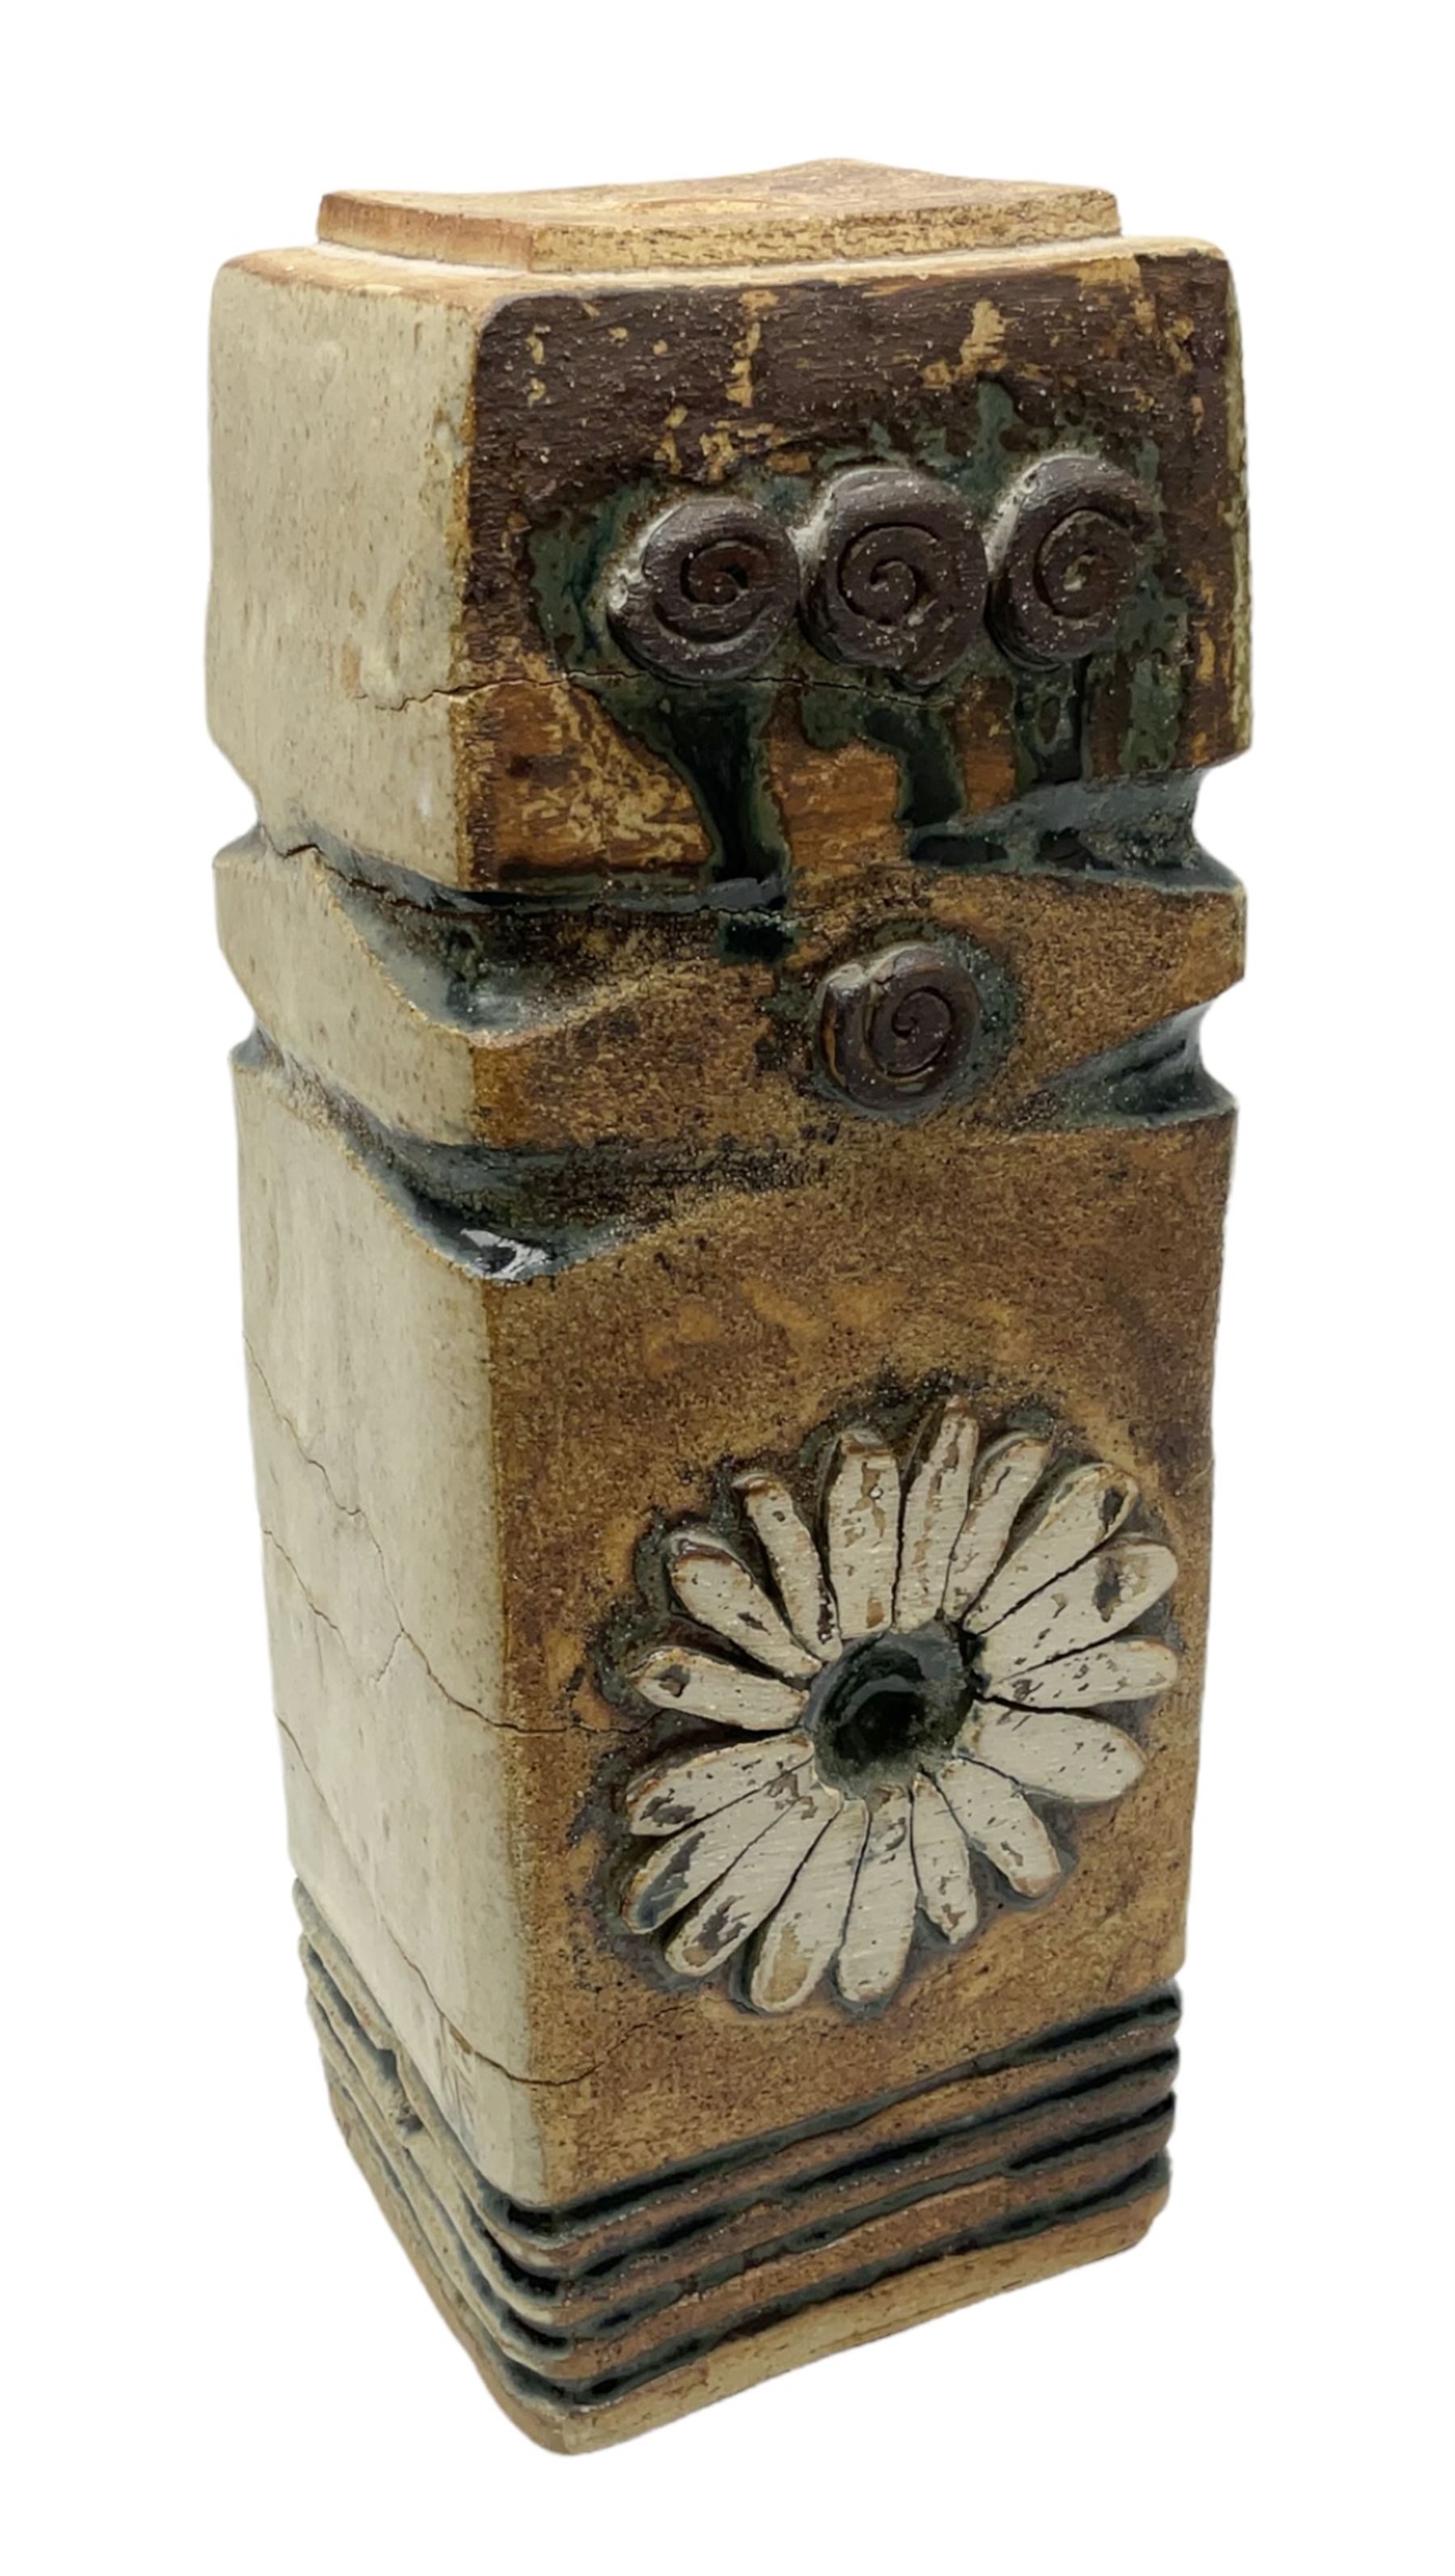 Studio pottery table lamp of slab built and moulded form with applied floral and abstract motifs